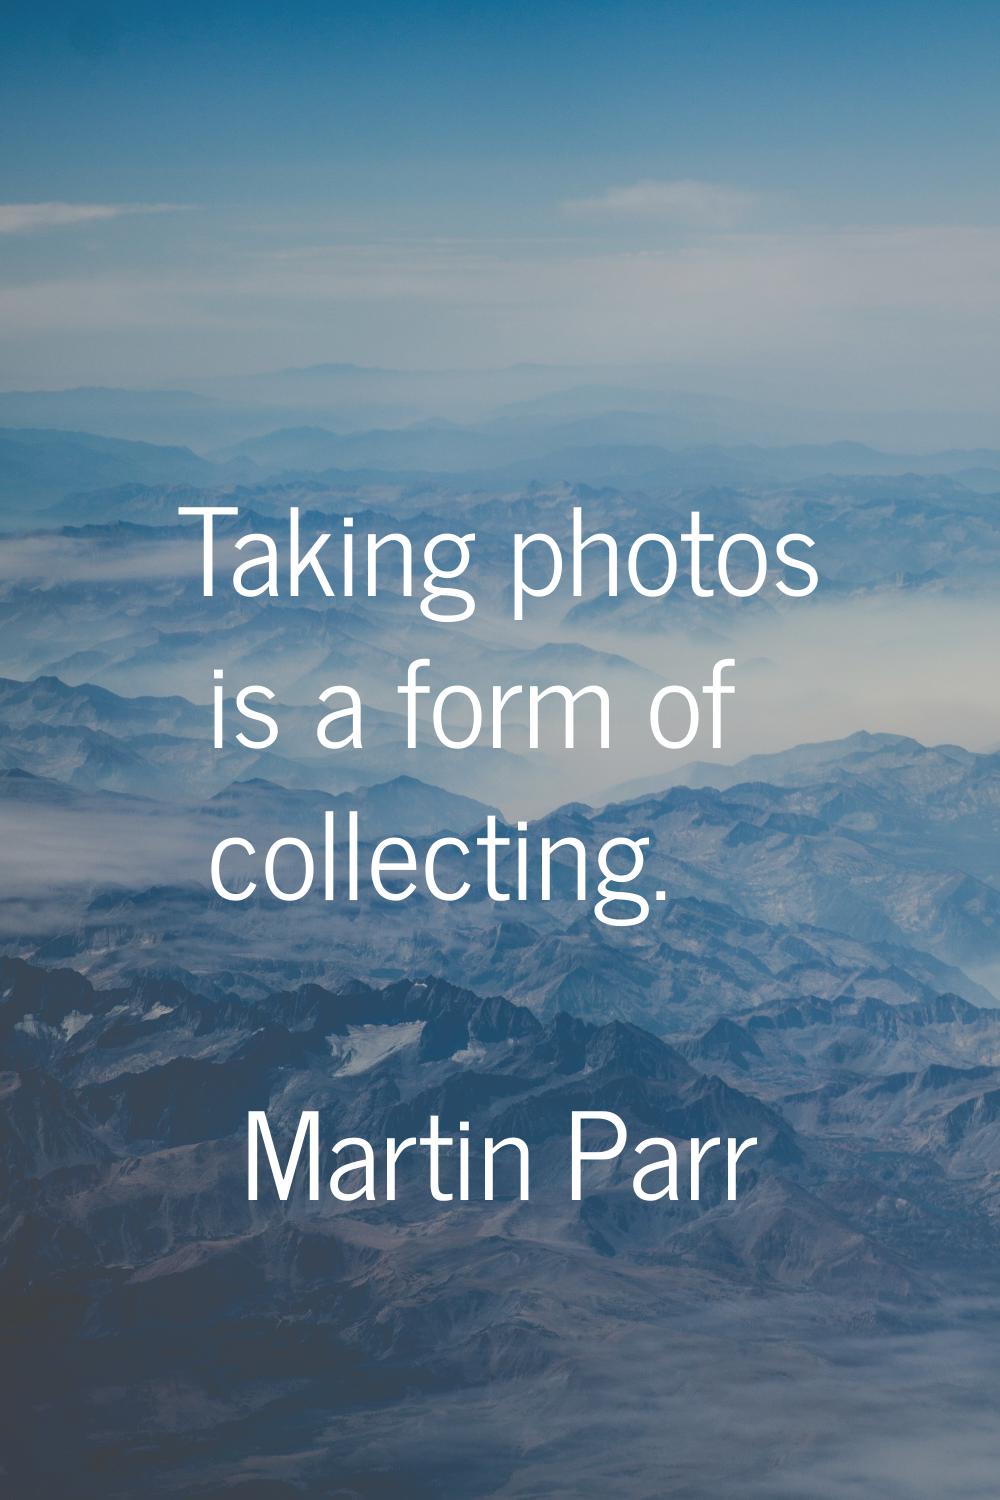 Taking photos is a form of collecting.